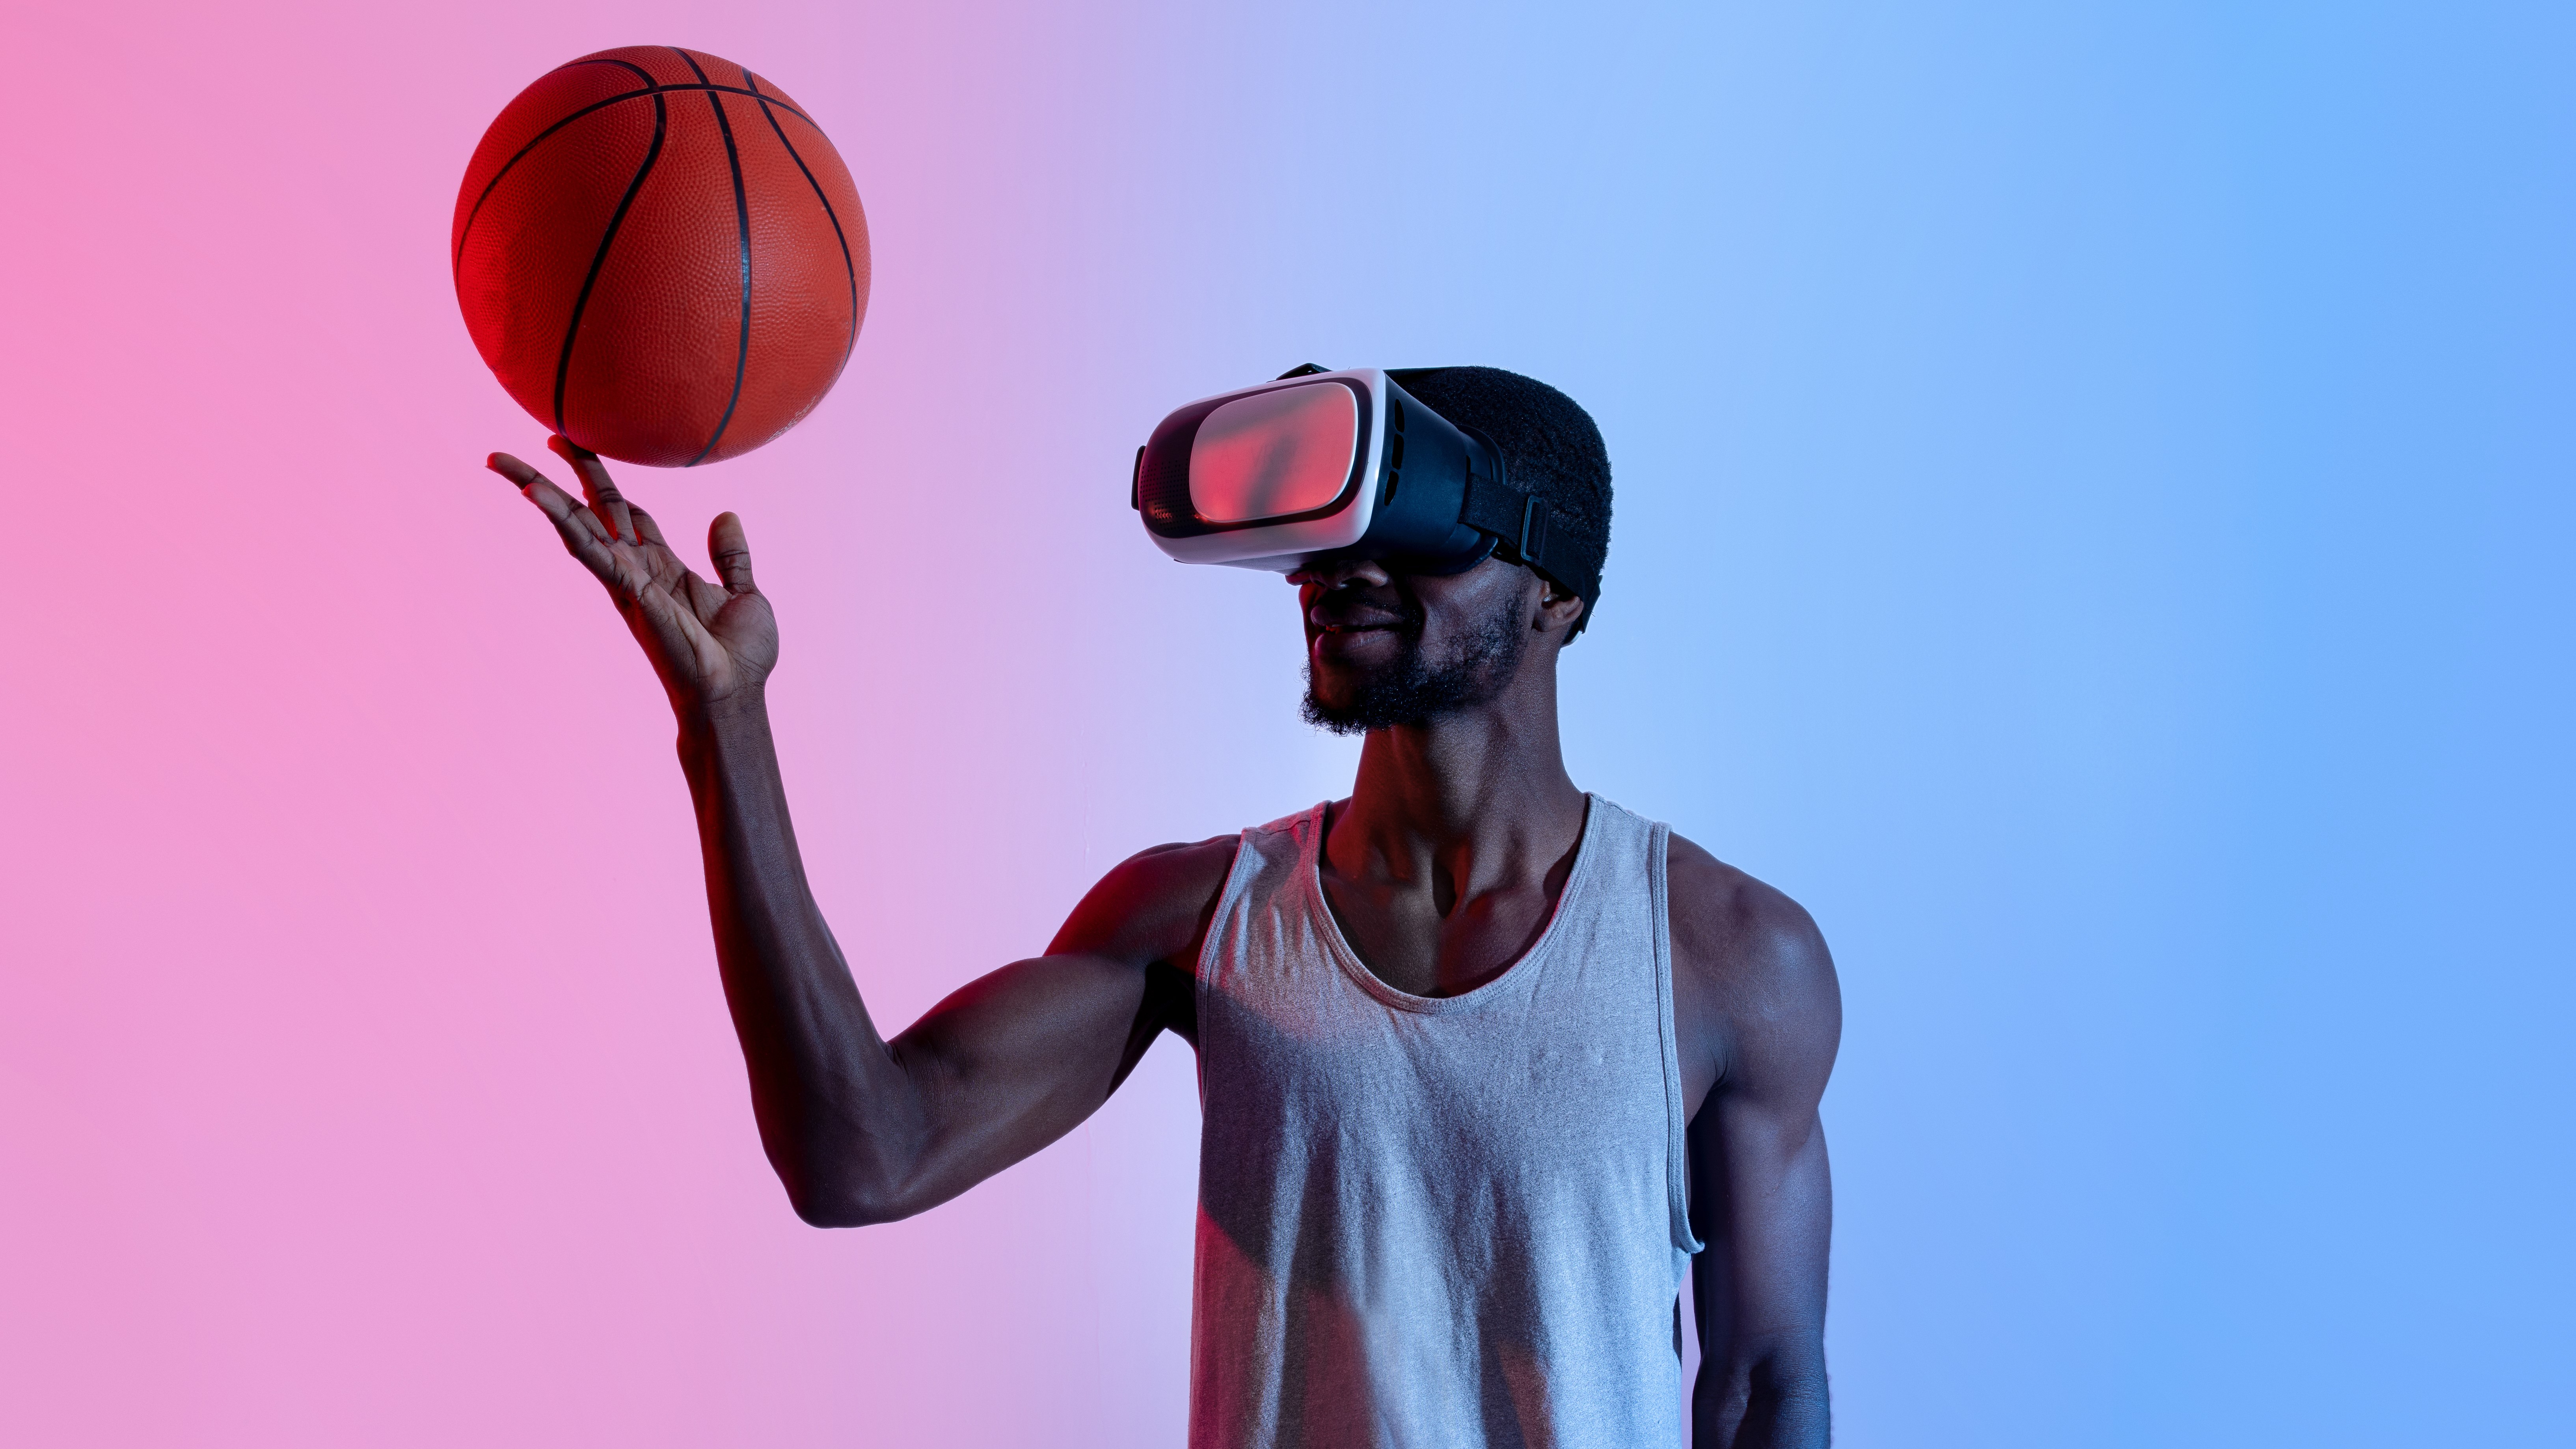 Oculus 2 owners can watch over 50 live NBA games for free | TechRadar